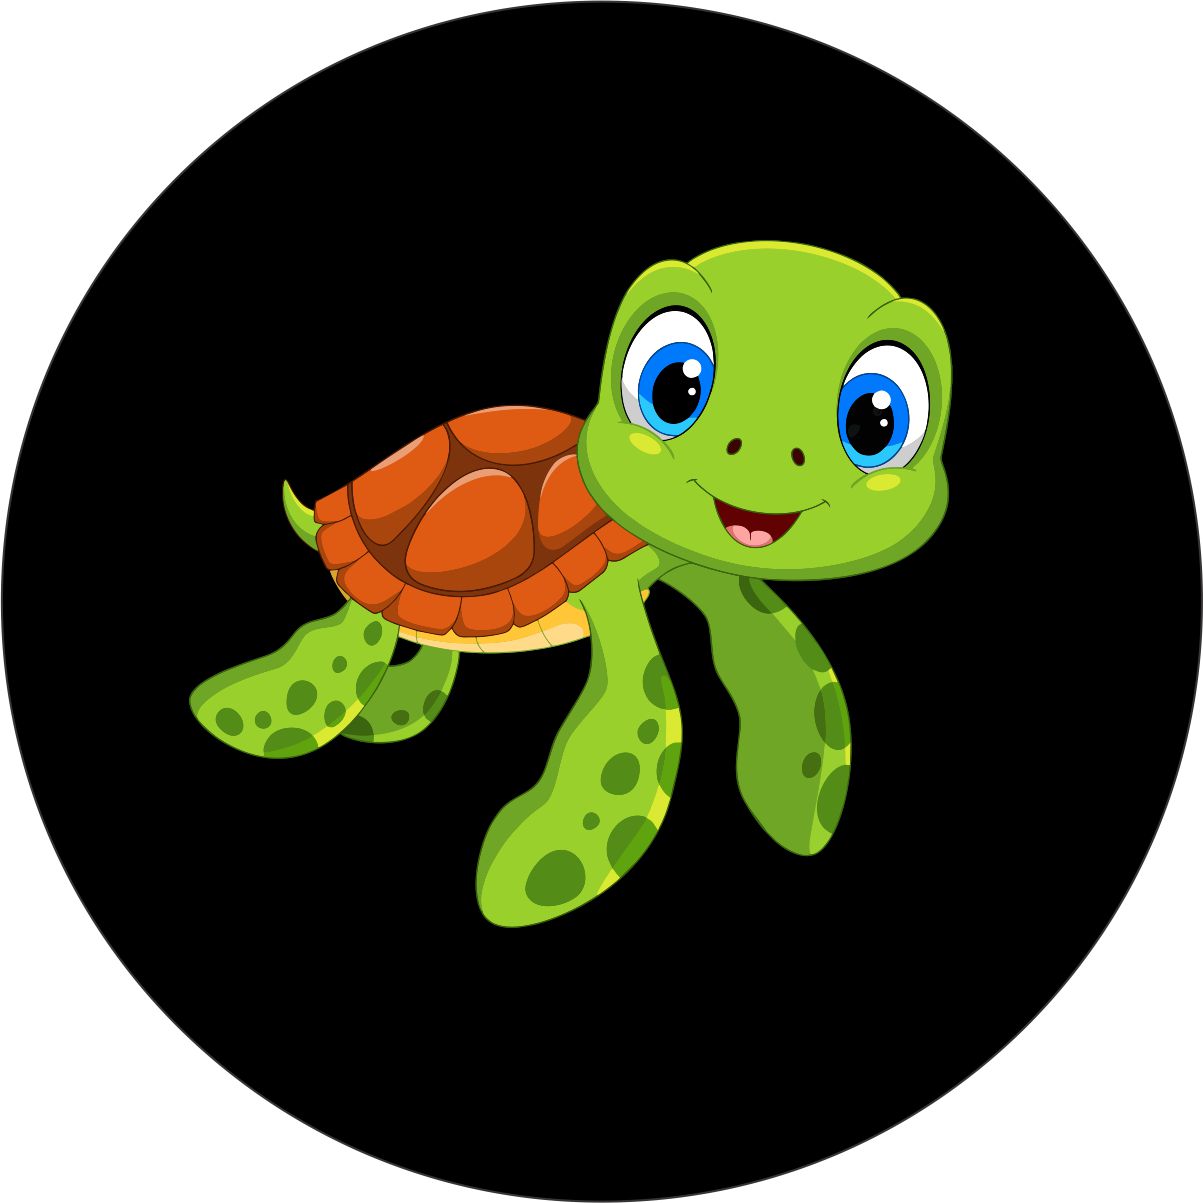 Bright and cute cartoon turtle spare tire cover design for a Jeep Wrangler, Ford Bronco, RV, travel trailer, camper, and more.